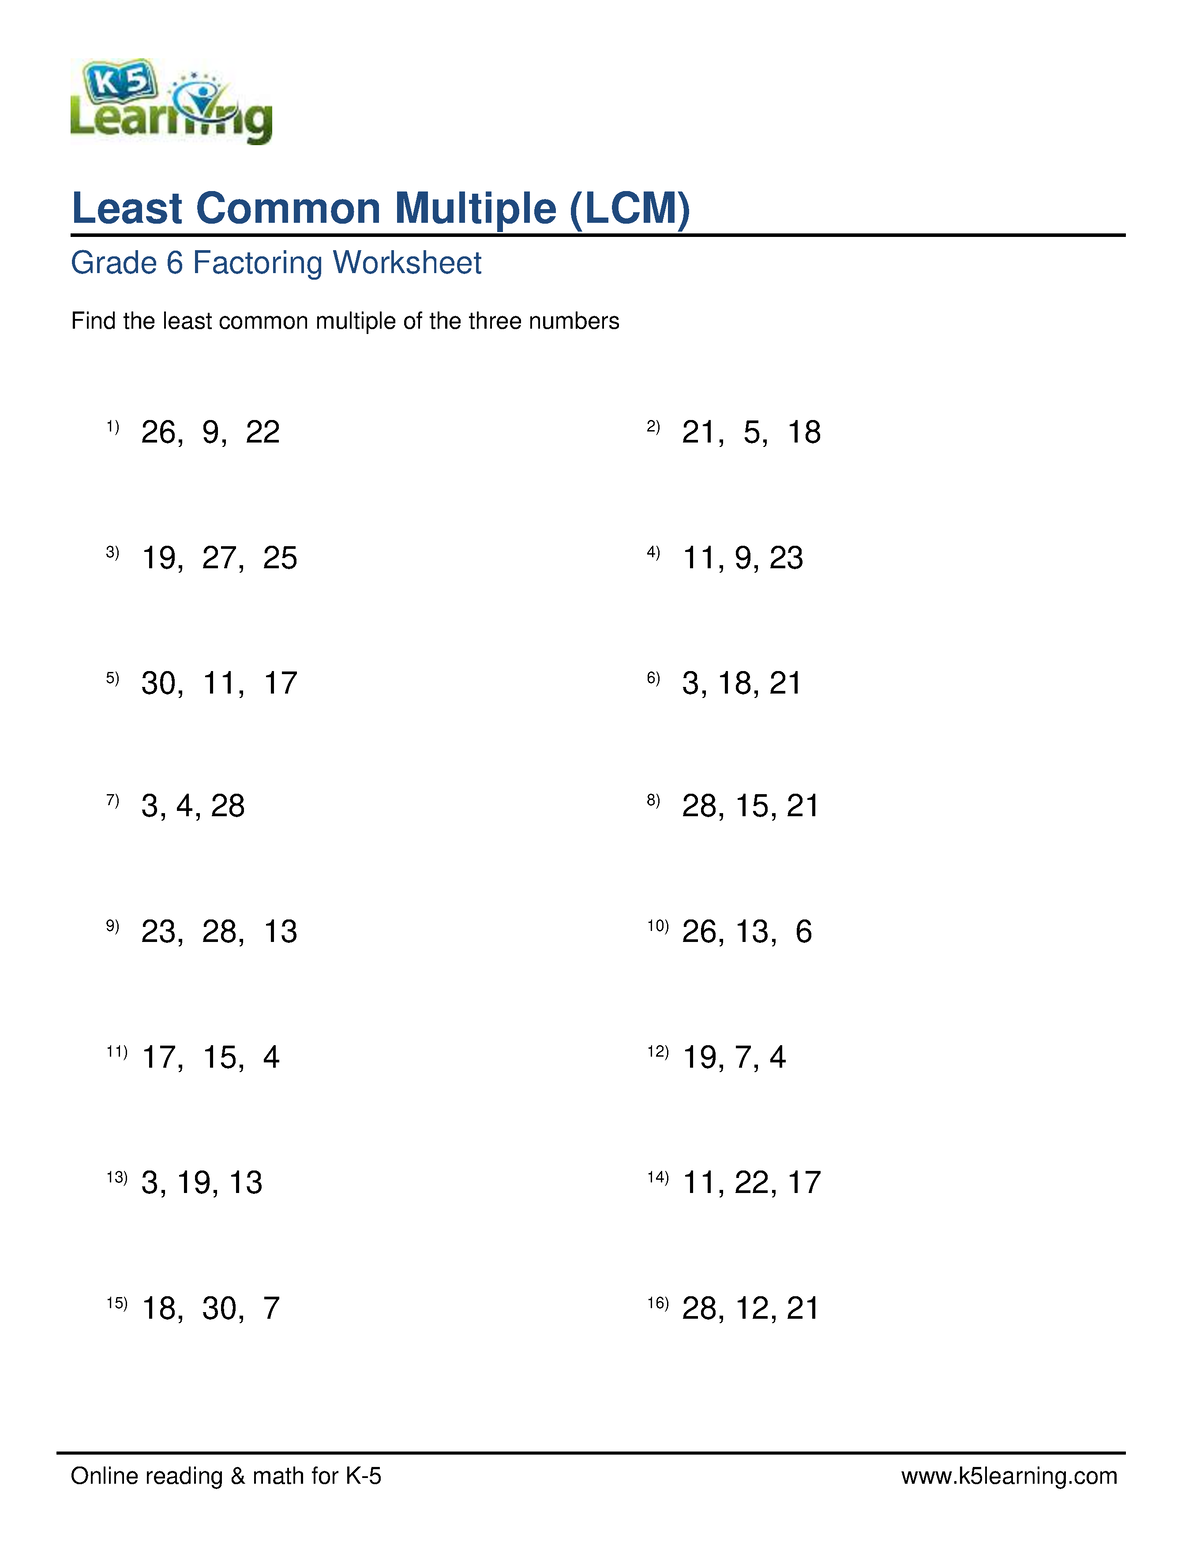 Grade 6 least common multiple lcm 3 numbers 2 30 b - Online reading ...